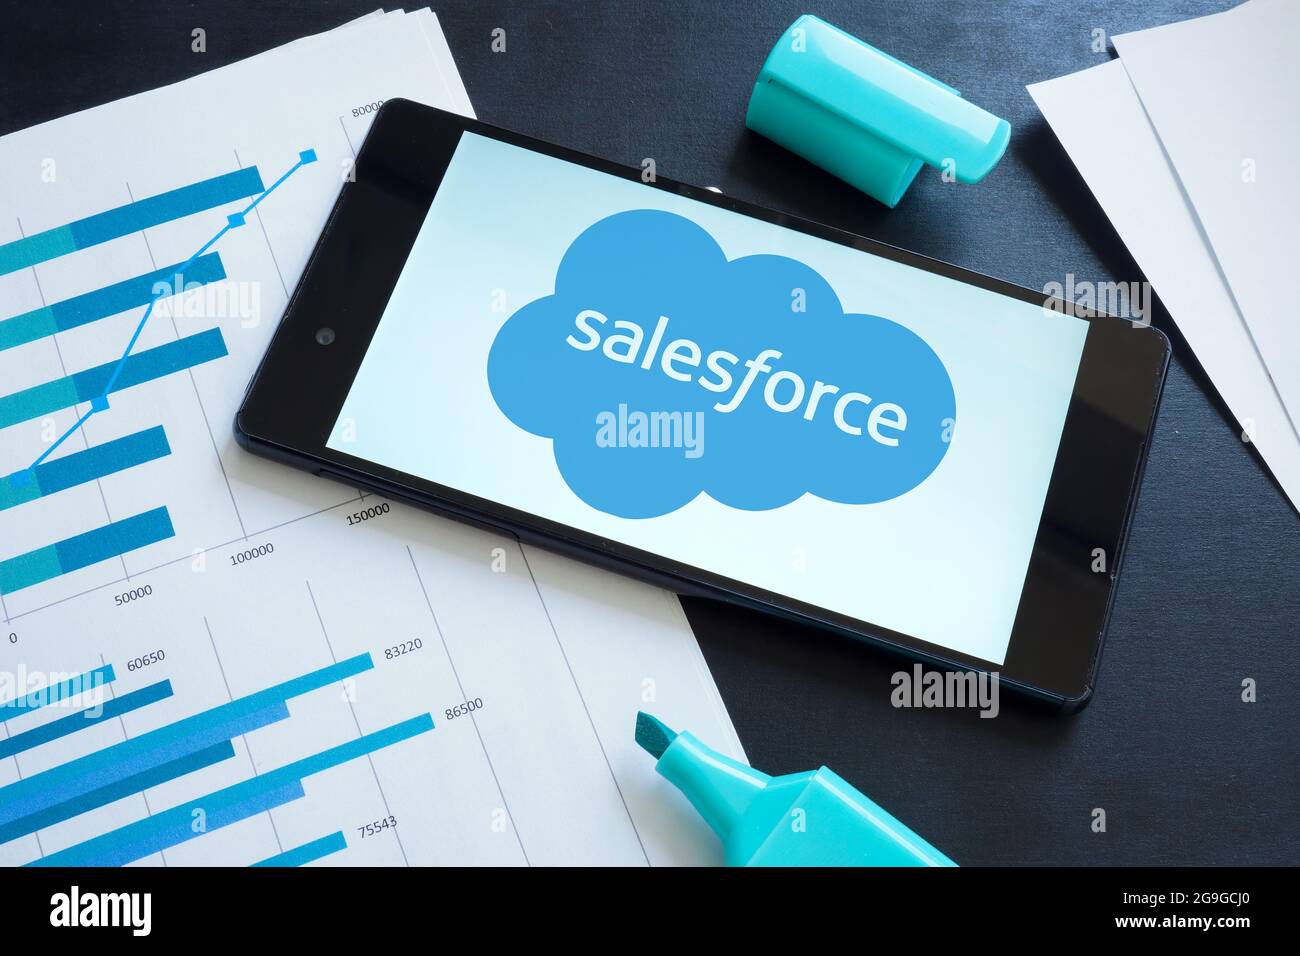 KYIV, UKRAINE - June 30, 2021. Salesforce logo on the smartphone and papers. Stock Photo